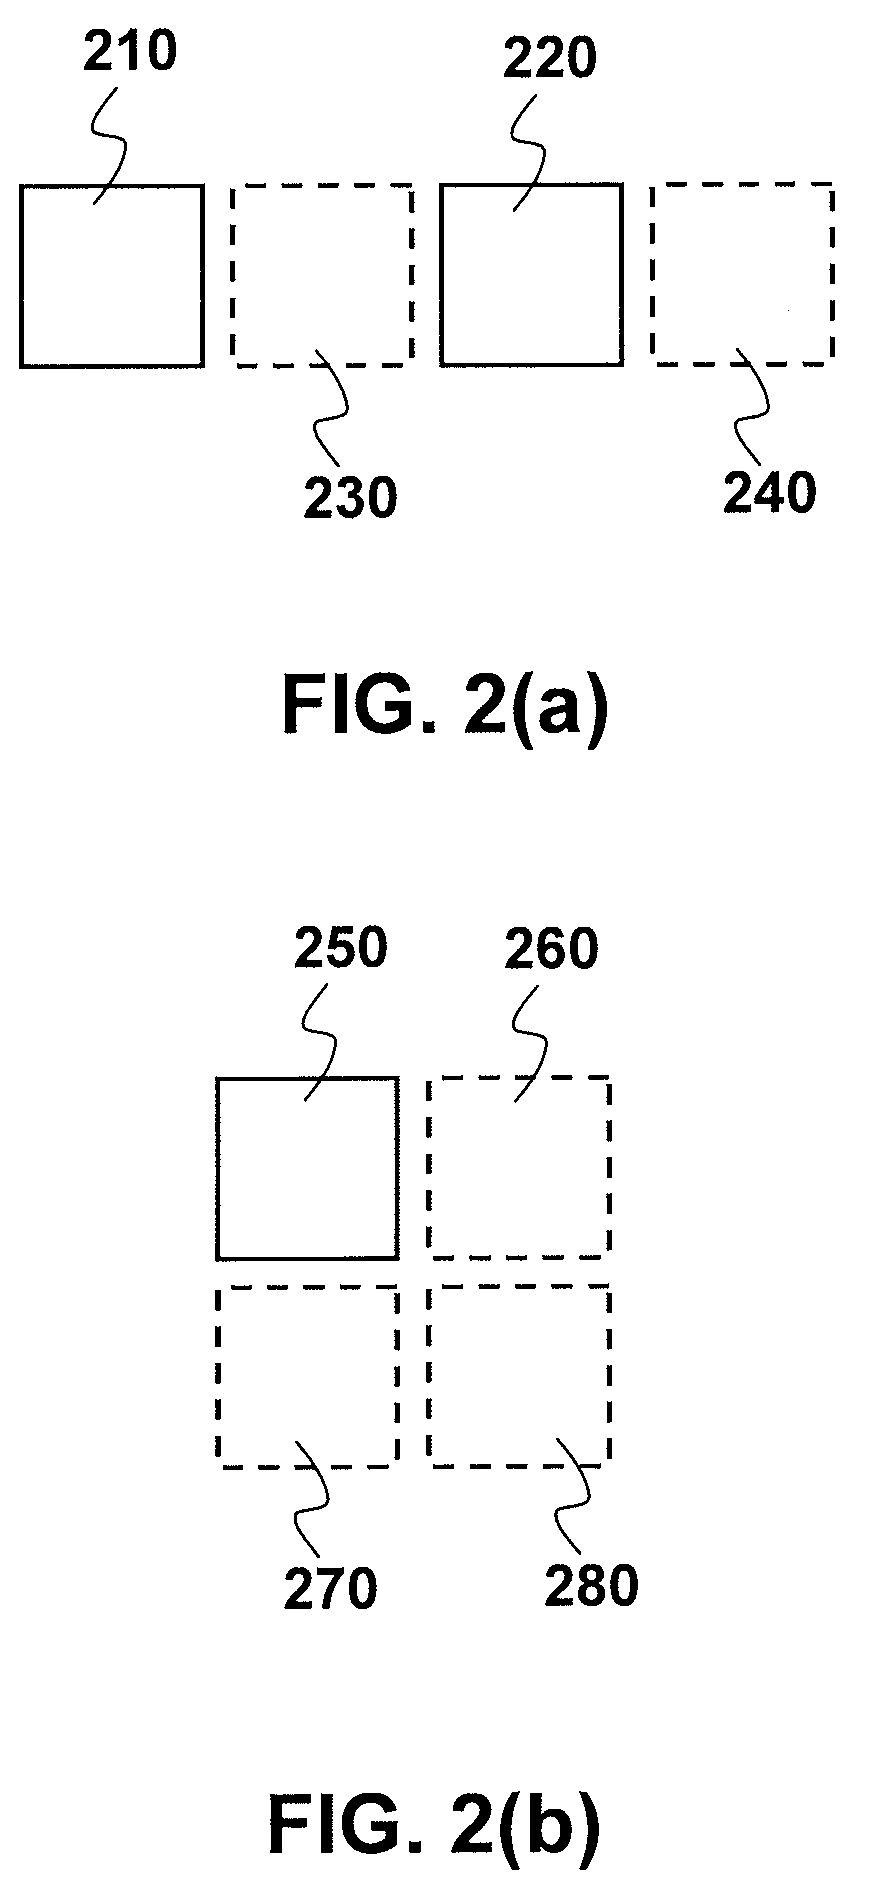 Method and apparatus for subpixel-based down-sampling